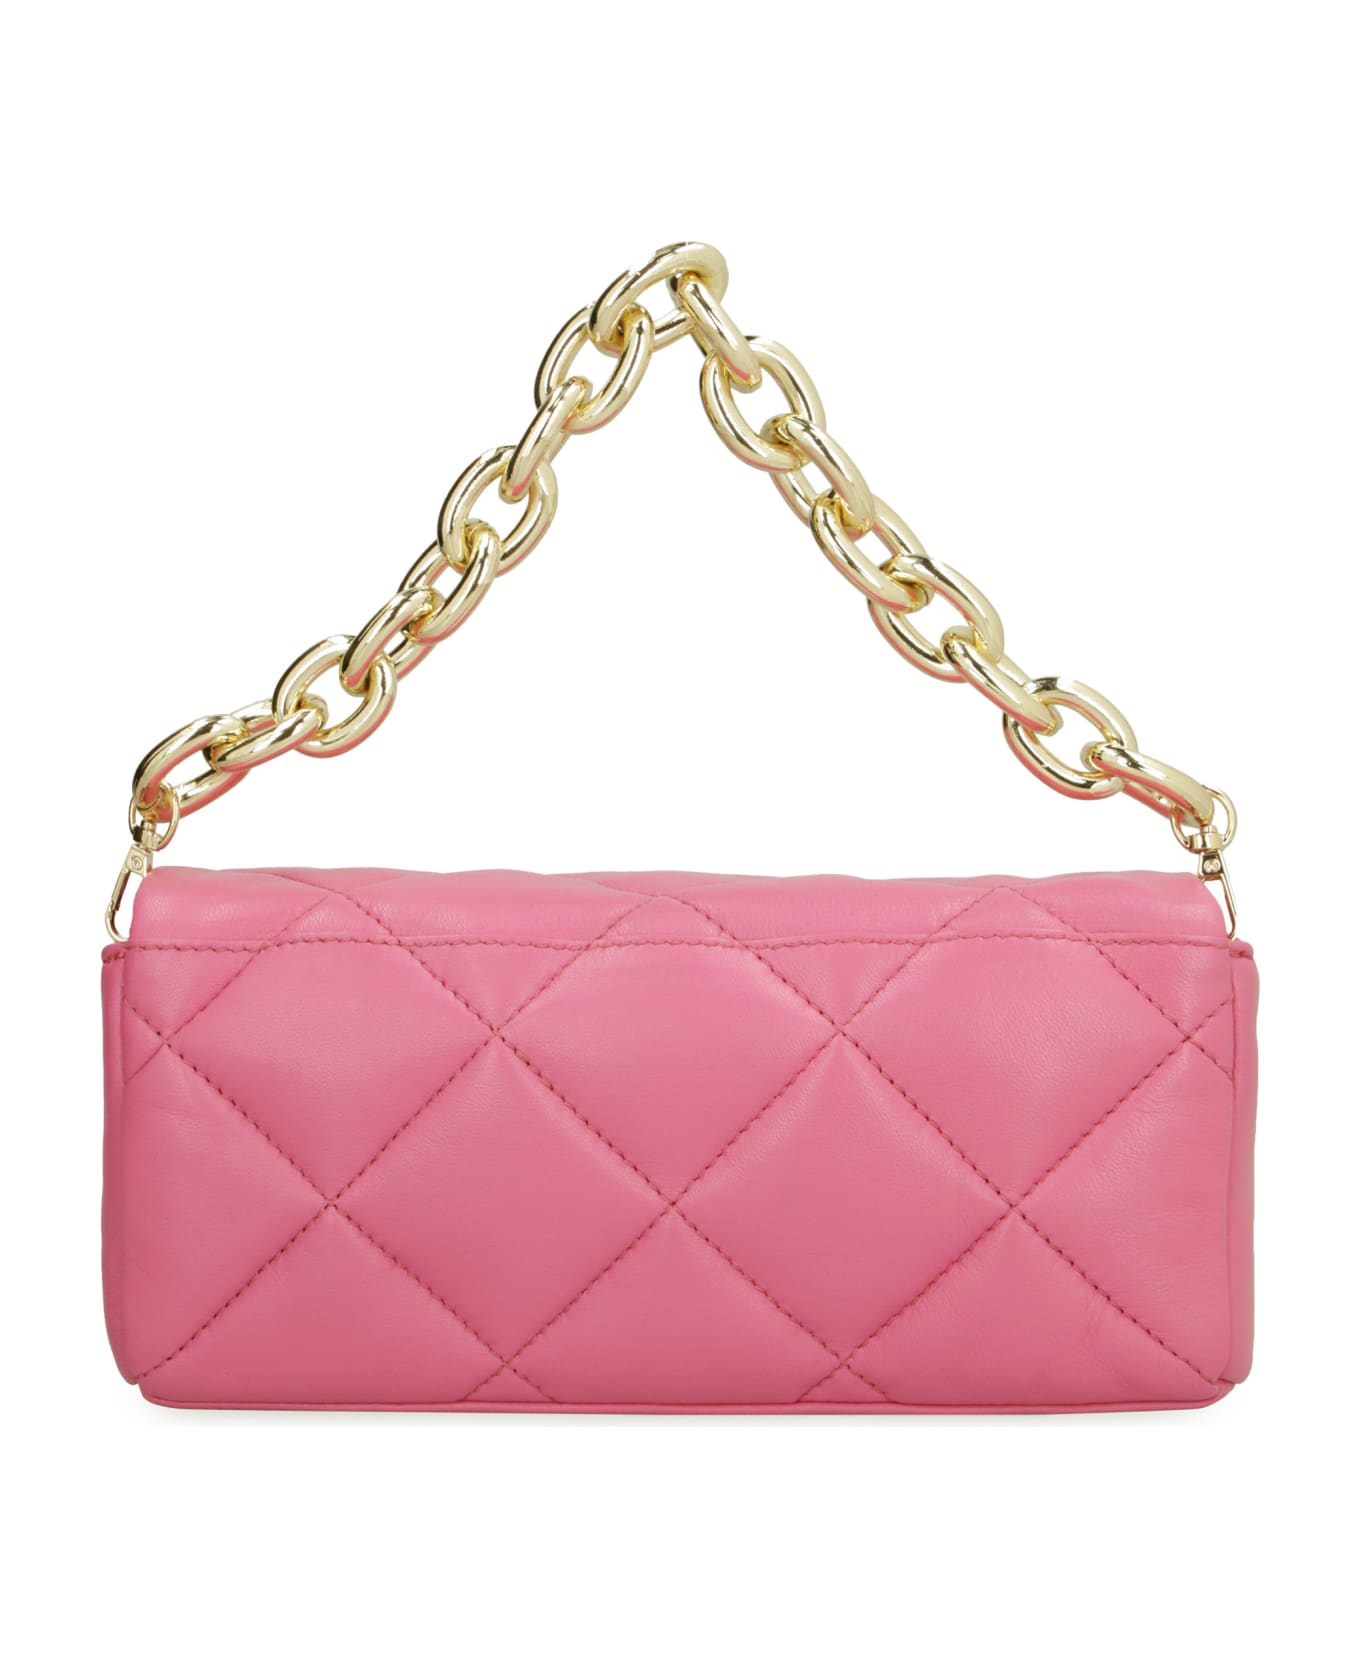 STAND STUDIO Hera Quilted Leather Bag - Fuchsia